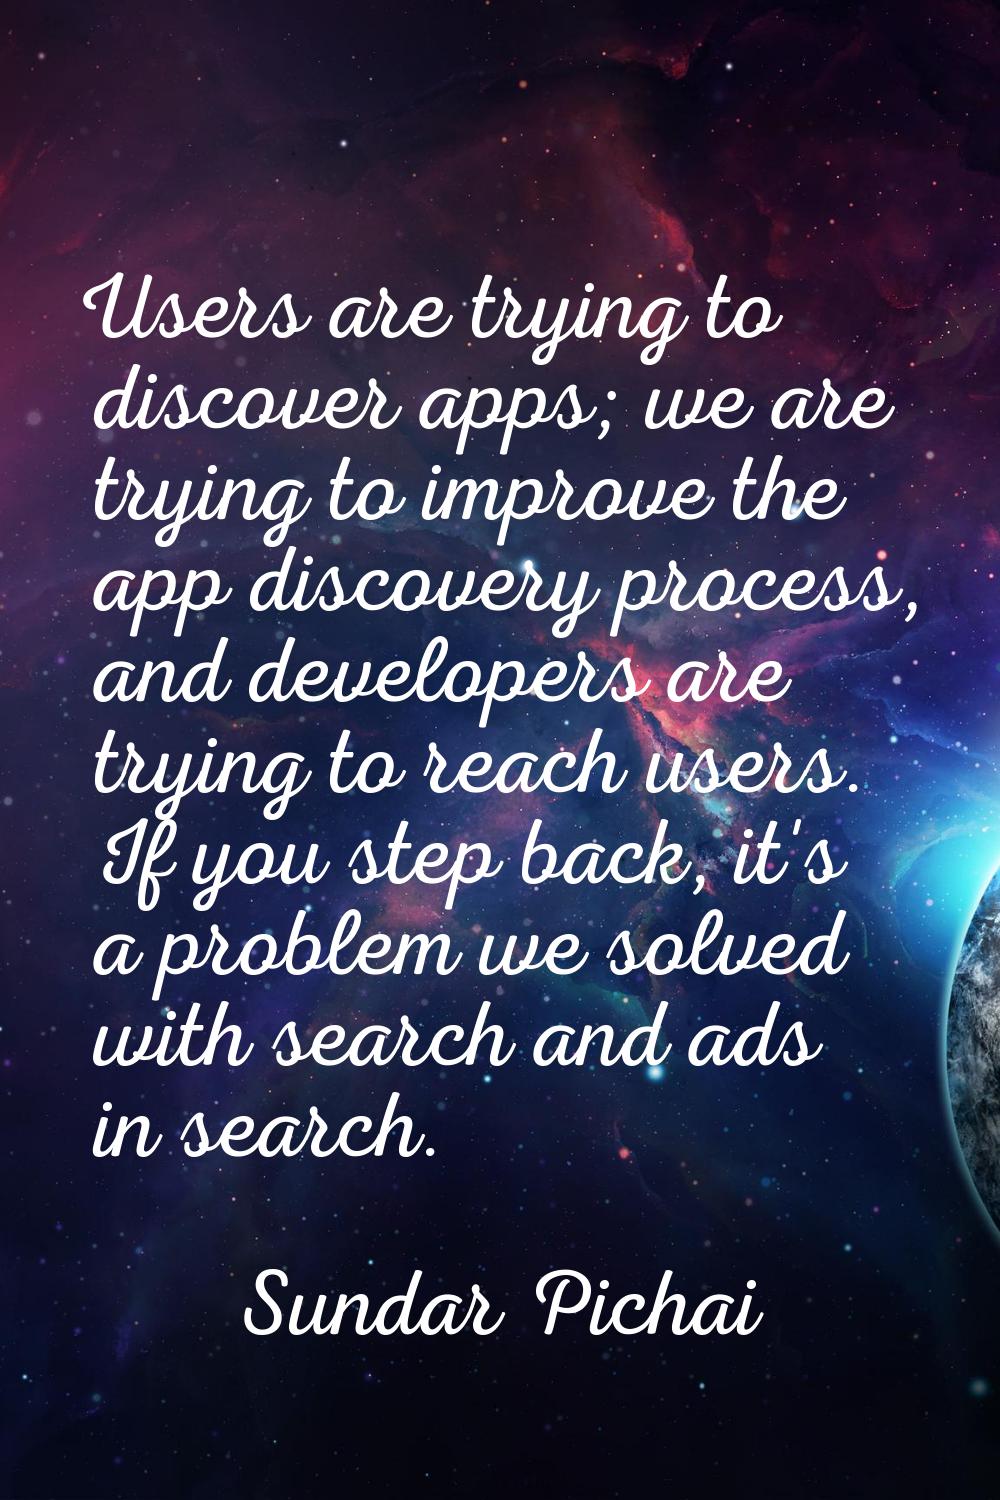 Users are trying to discover apps; we are trying to improve the app discovery process, and develope